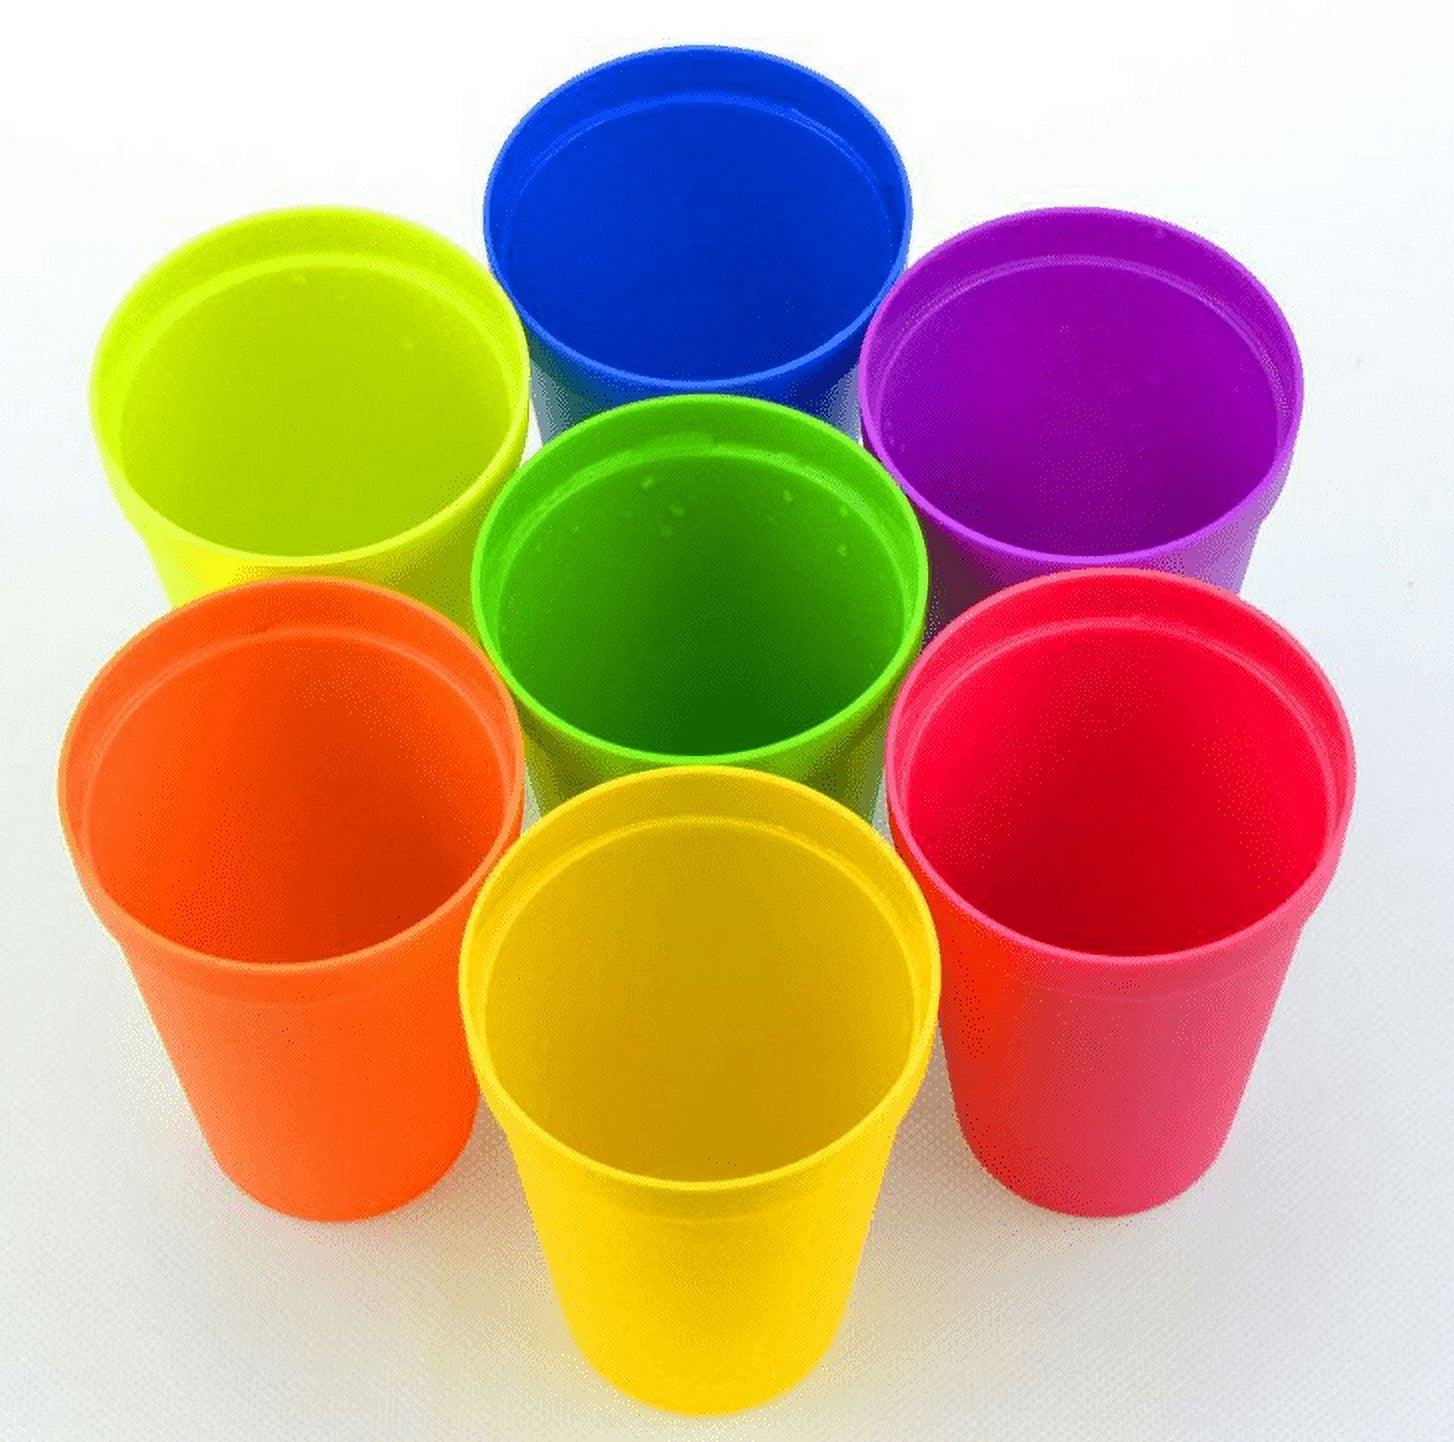 Youngever 8 Ounce Kids Cups, 9 Pack Kids Plastic Cups In 9 Assorted Colors,  8 Ounce Kids Drinking Cu…See more Youngever 8 Ounce Kids Cups, 9 Pack Kids